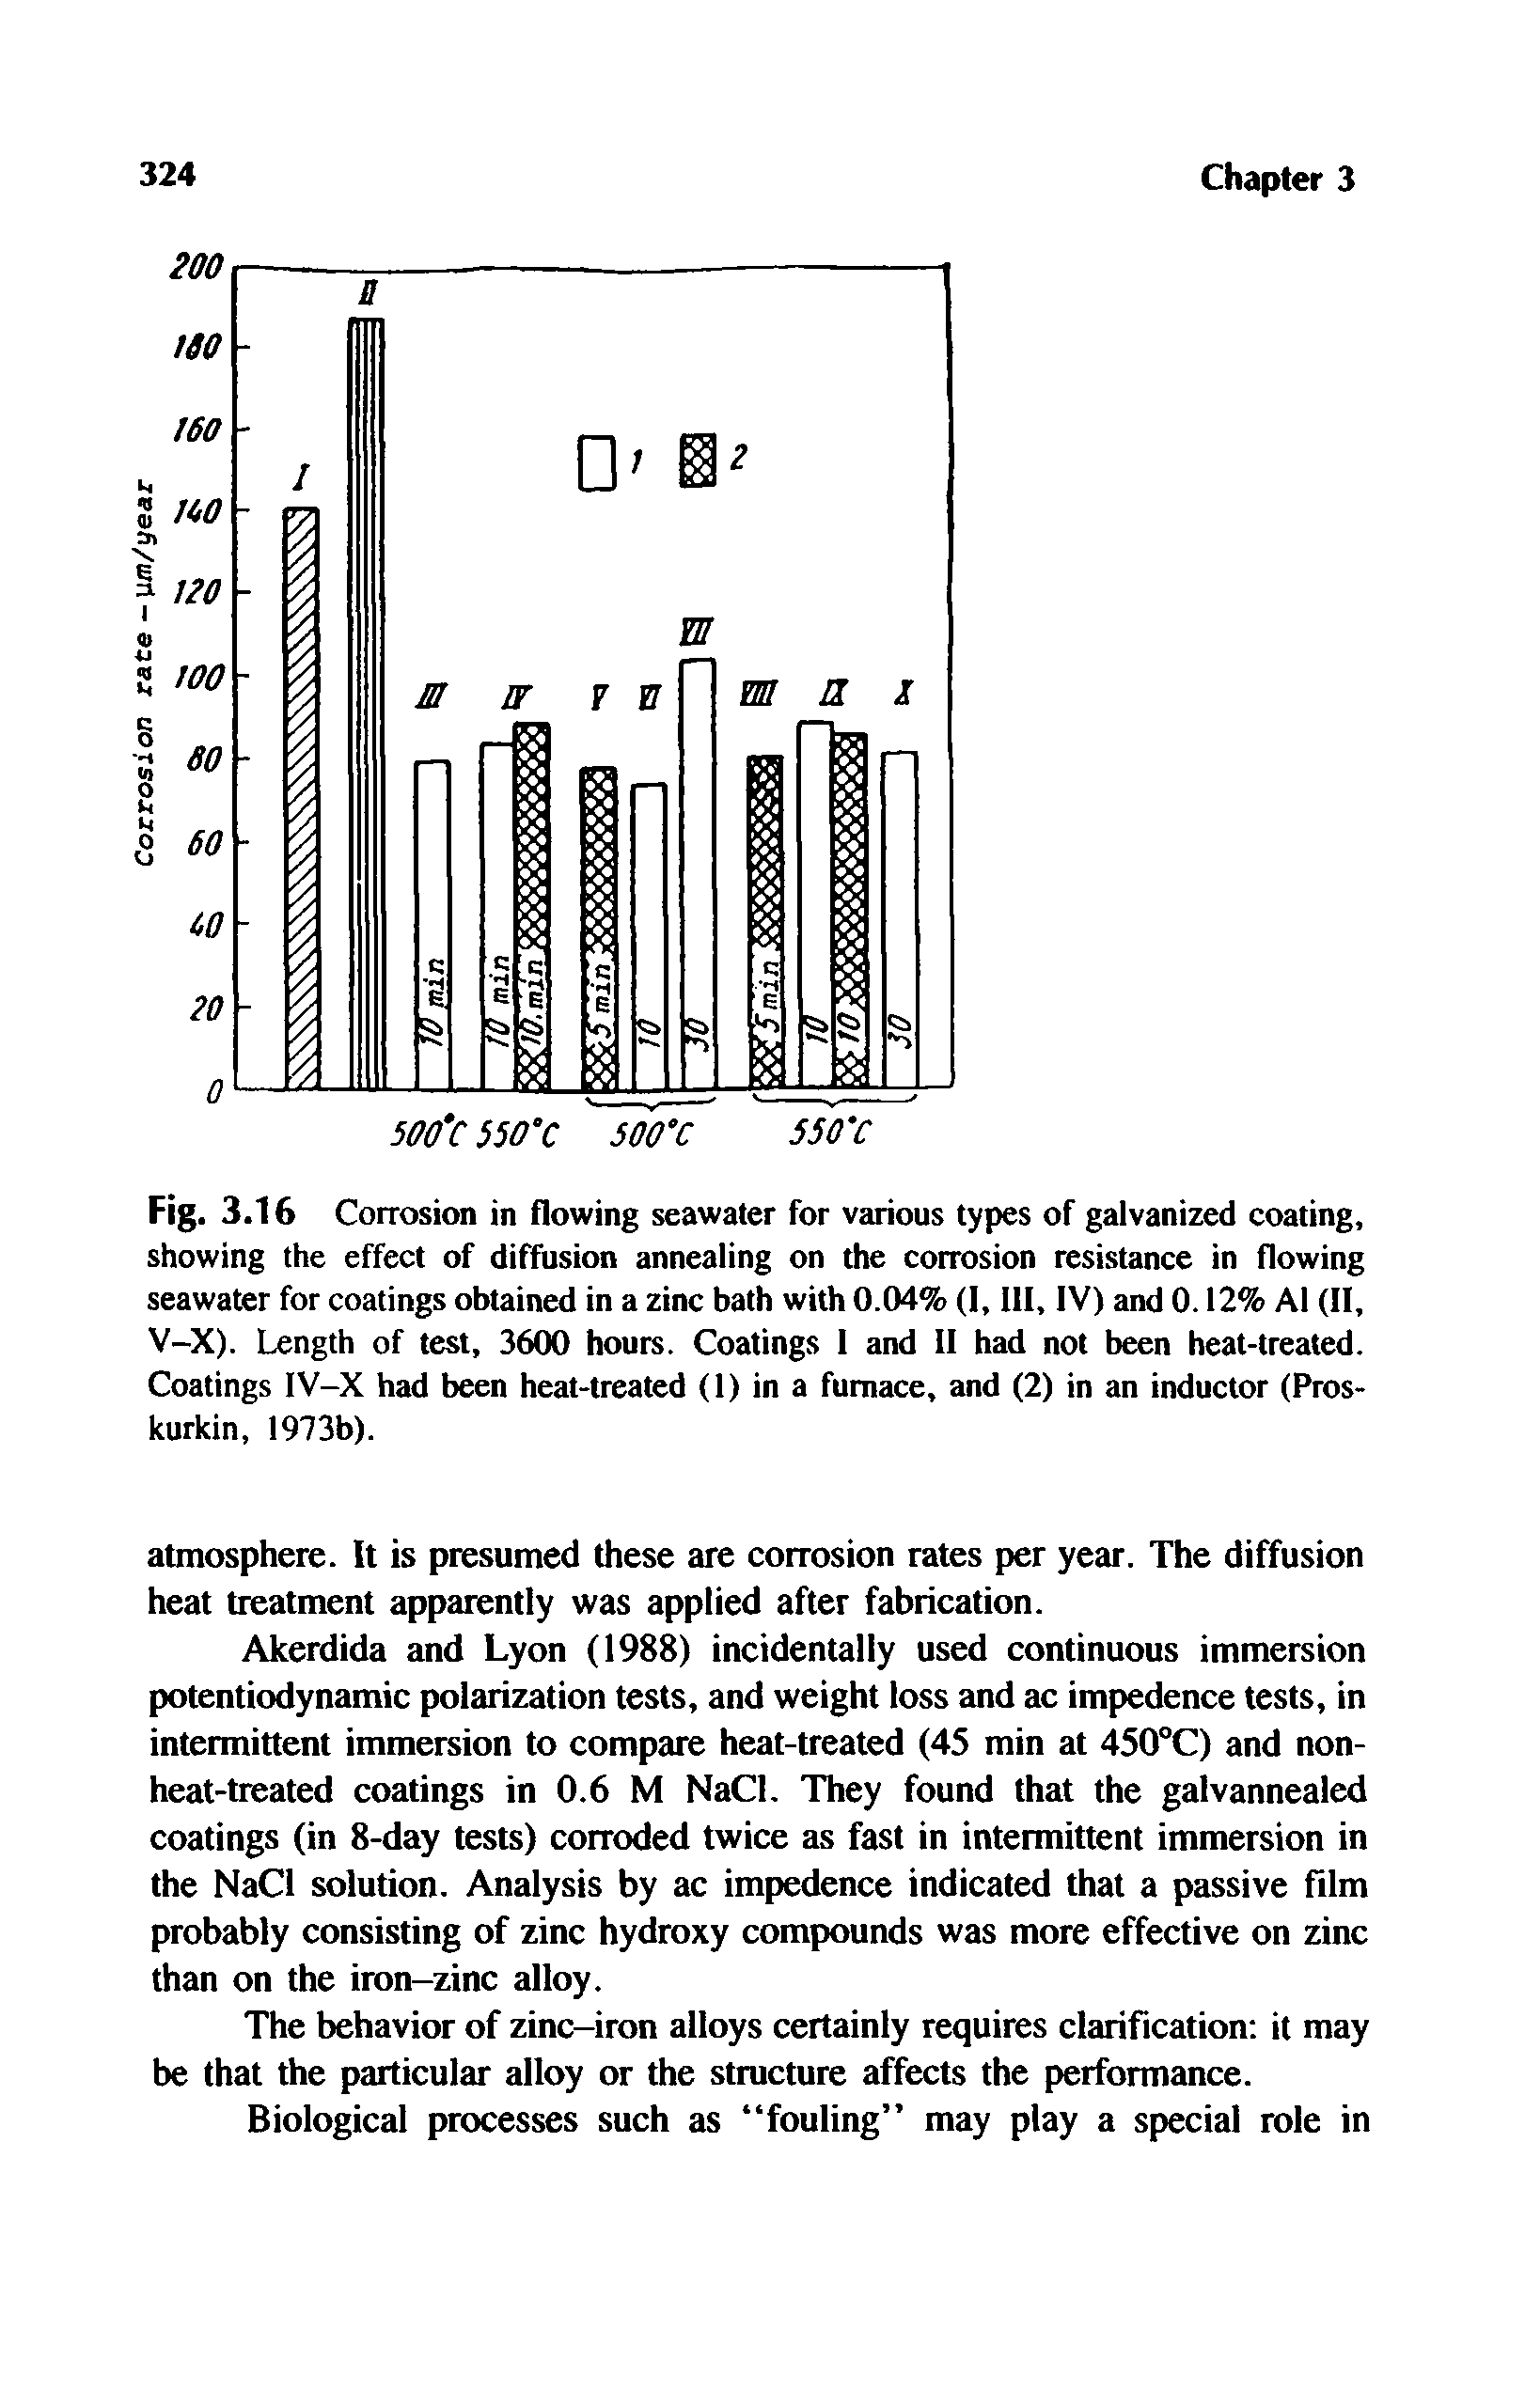 Fig. 3.16 Corrosion in flowing seawater for various types of galvanized coating, showing the effect of diffusion annealing on the corrosion resistance in flowing seawater for coatings obtained in a zinc bath with 0.04% (I, 111, IV) and 0.12% Al (II, V-X). Length of test, 3600 hours. Coatings I and II had not been heat-treated. Coatings I V-X had been heat-treated (1) in a furnace, and (2) in an inductor (Pros-kurkin, 1973b).